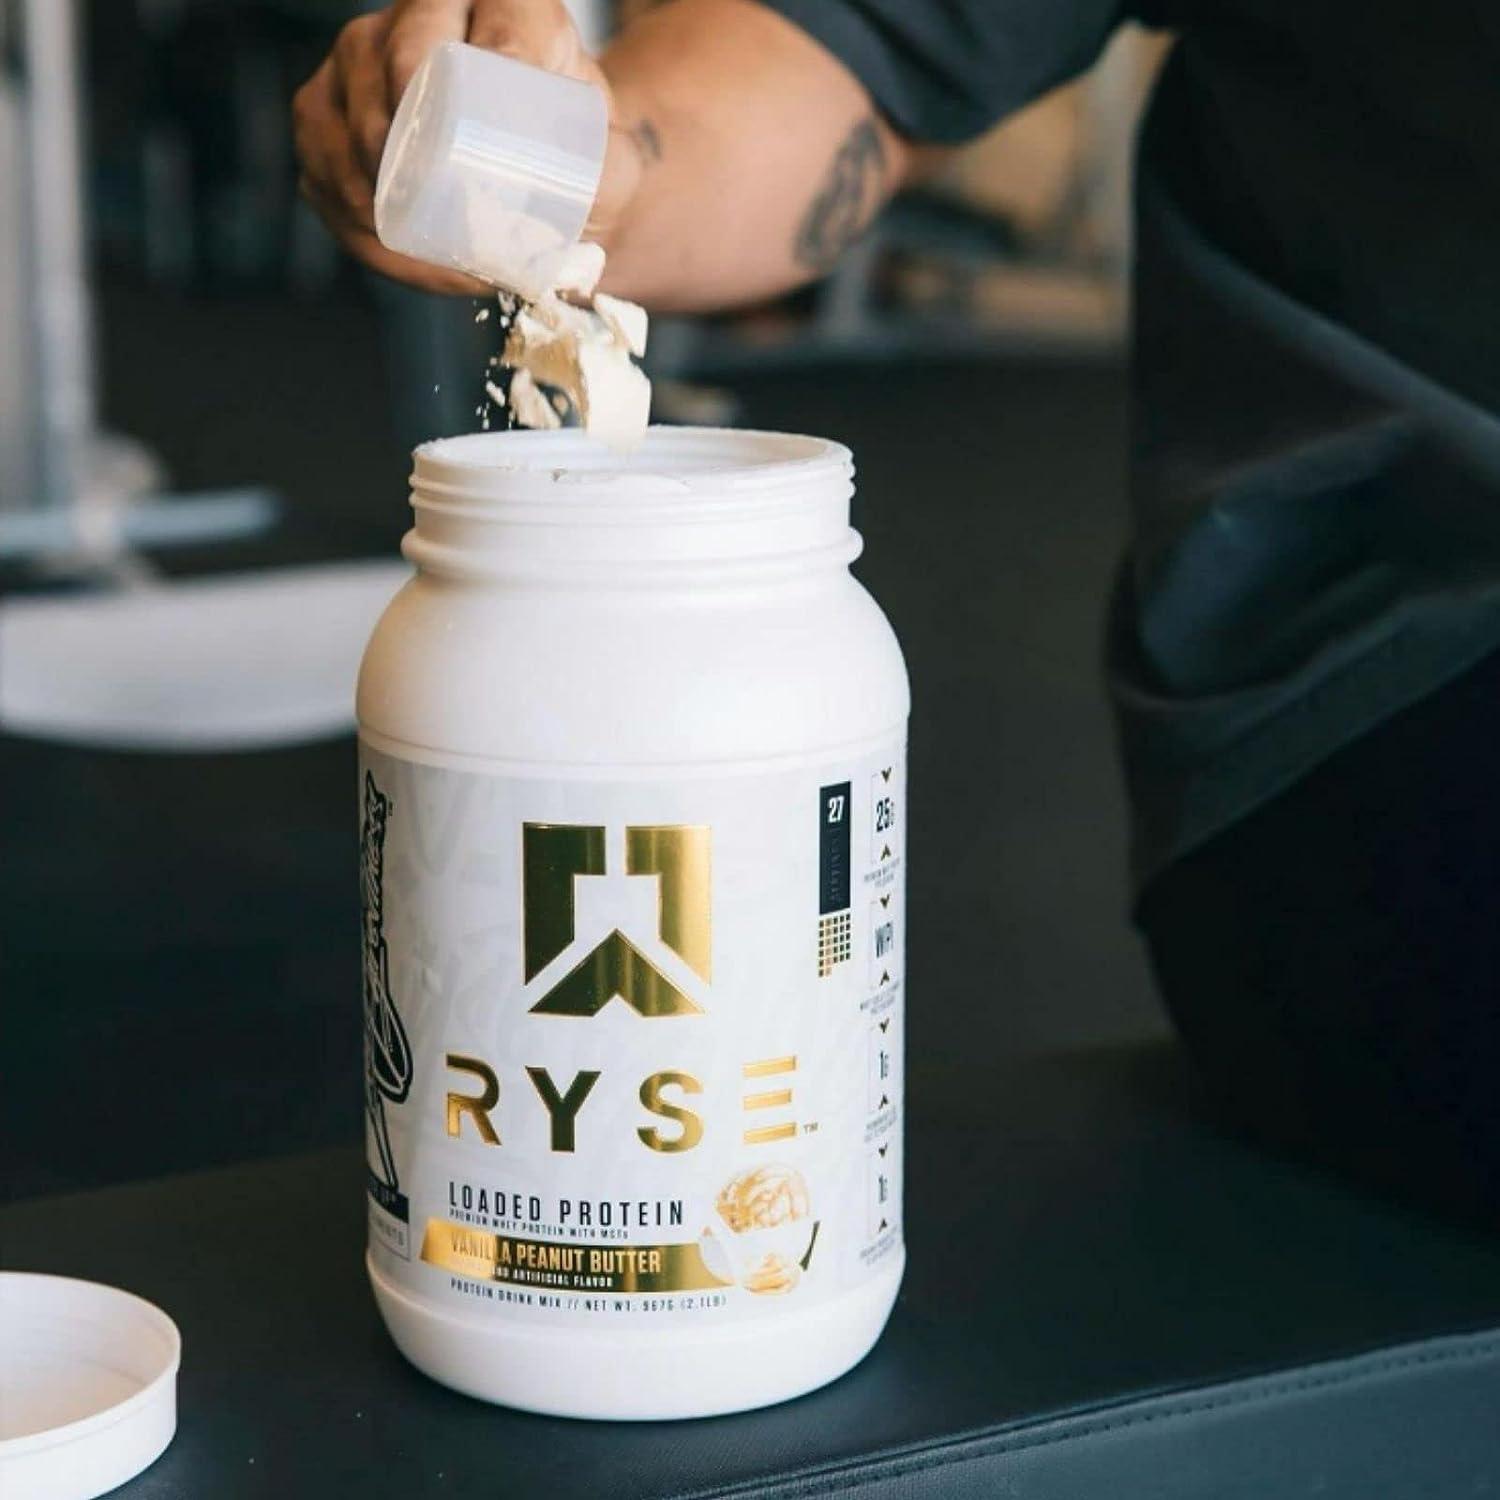 Ryse Loaded Protein Powder | 25g Whey Protein Isolate & Concentrate | with  Prebiotic Fiber & MCTs | Low Carbs & Low Sugar | 54 Servings (Peanut Butter